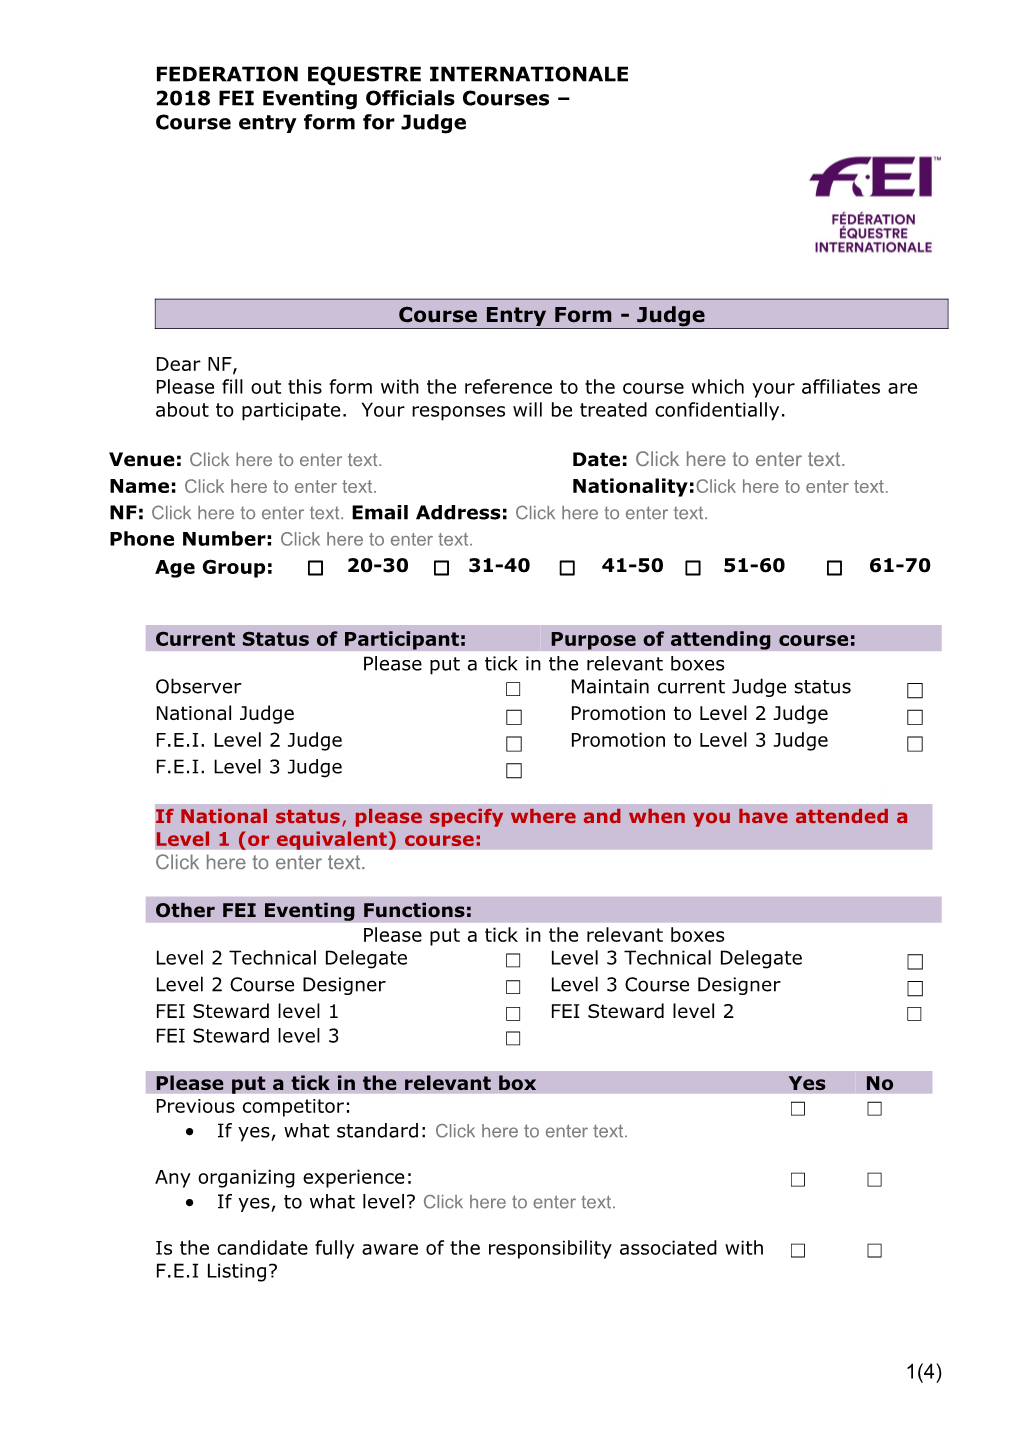 Course Entry Form- Judge